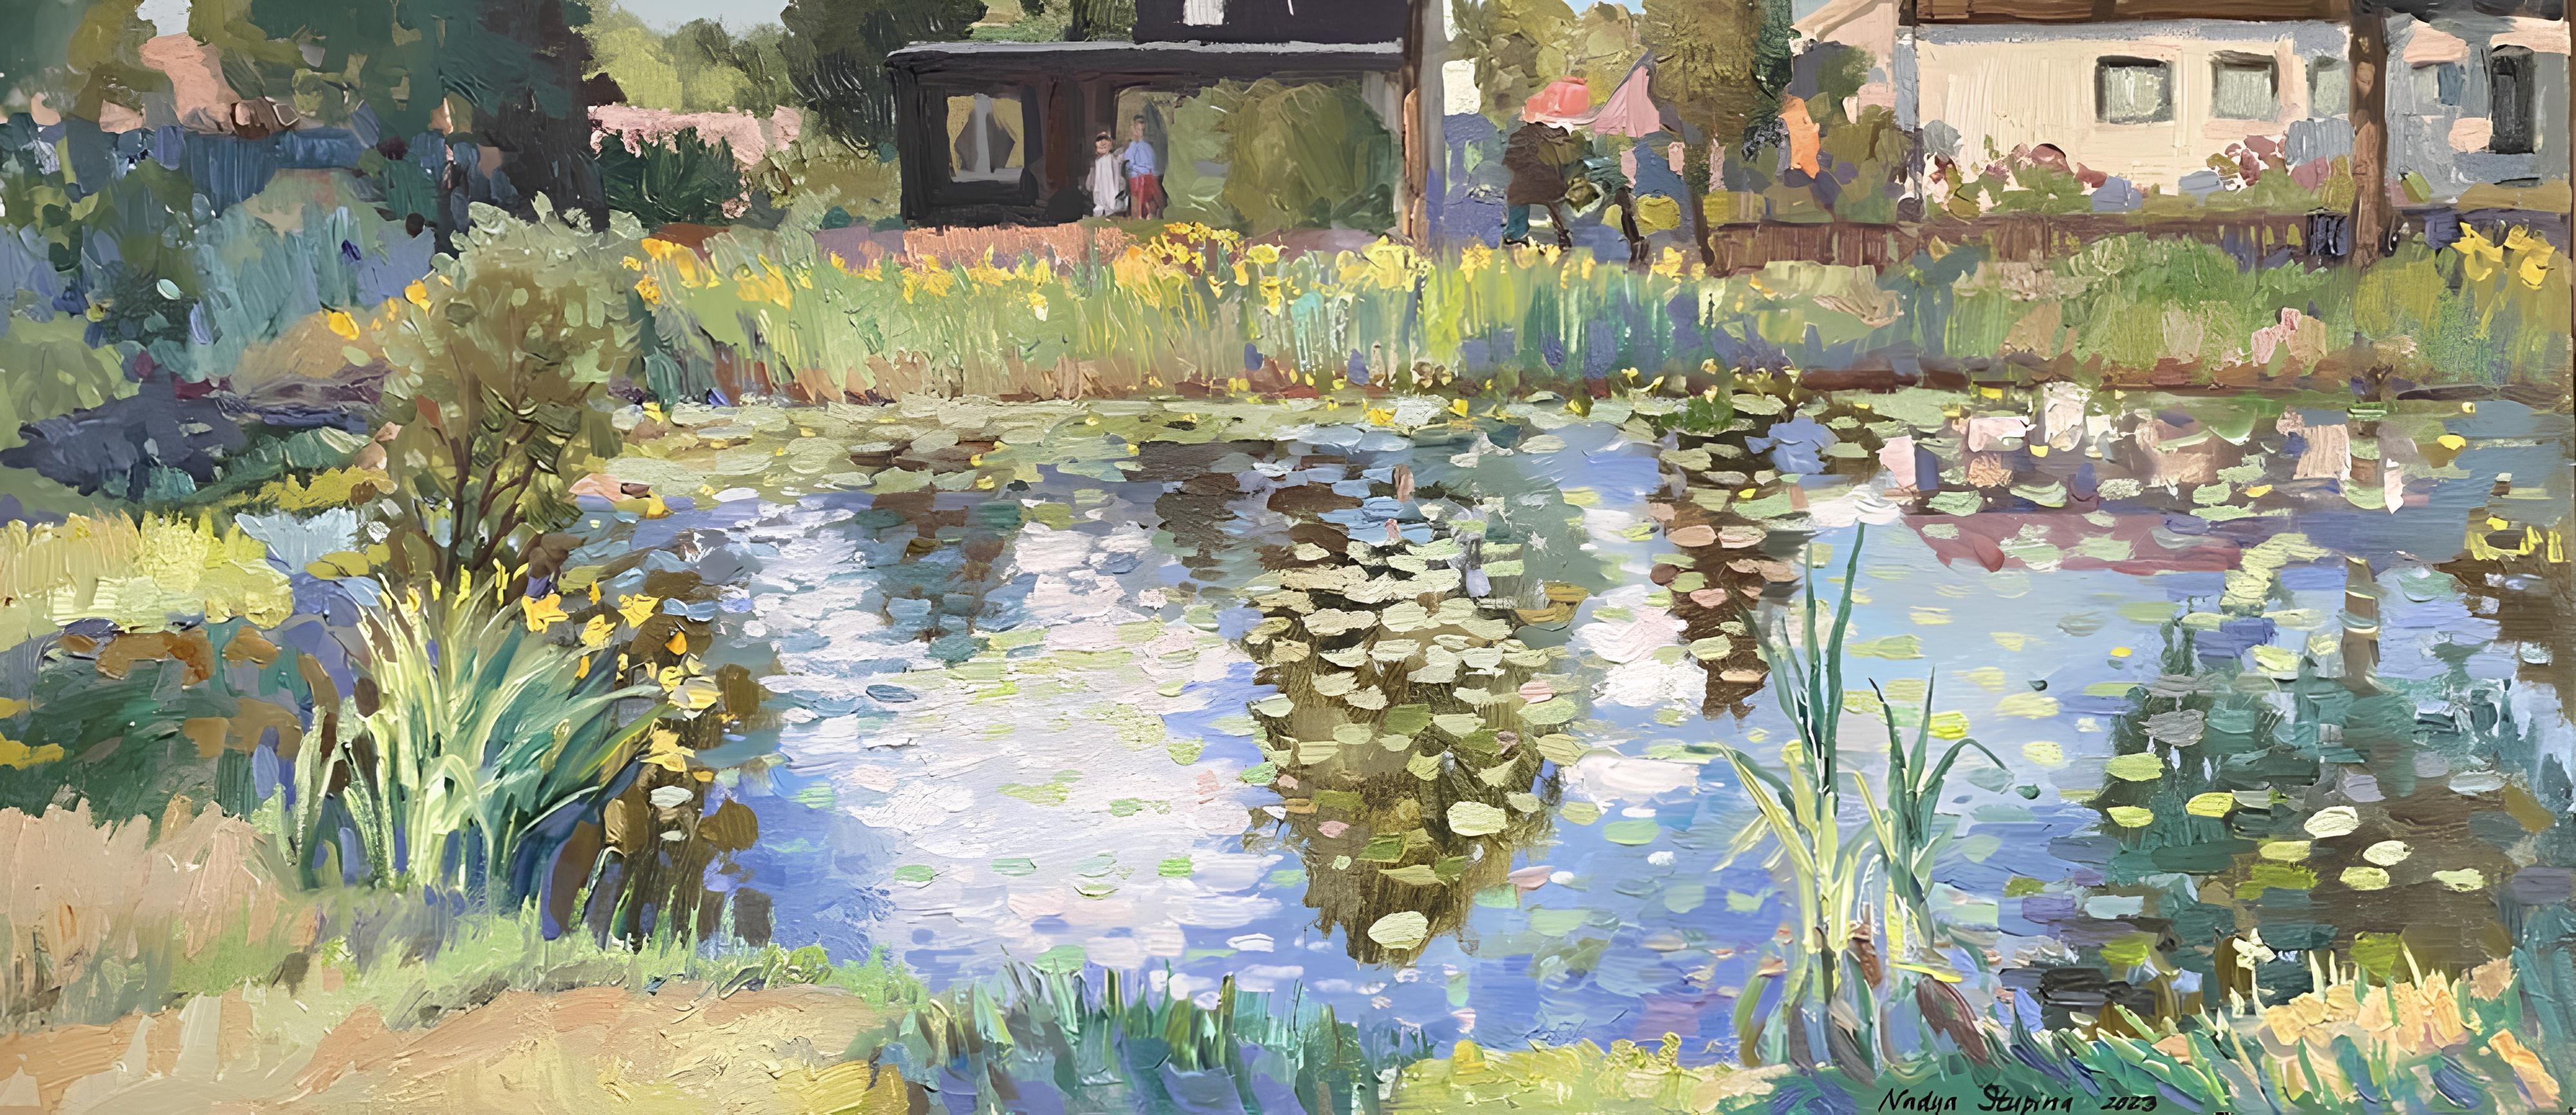 Nadezda Stupina Landscape Painting - A pond with water lilies and irises 1